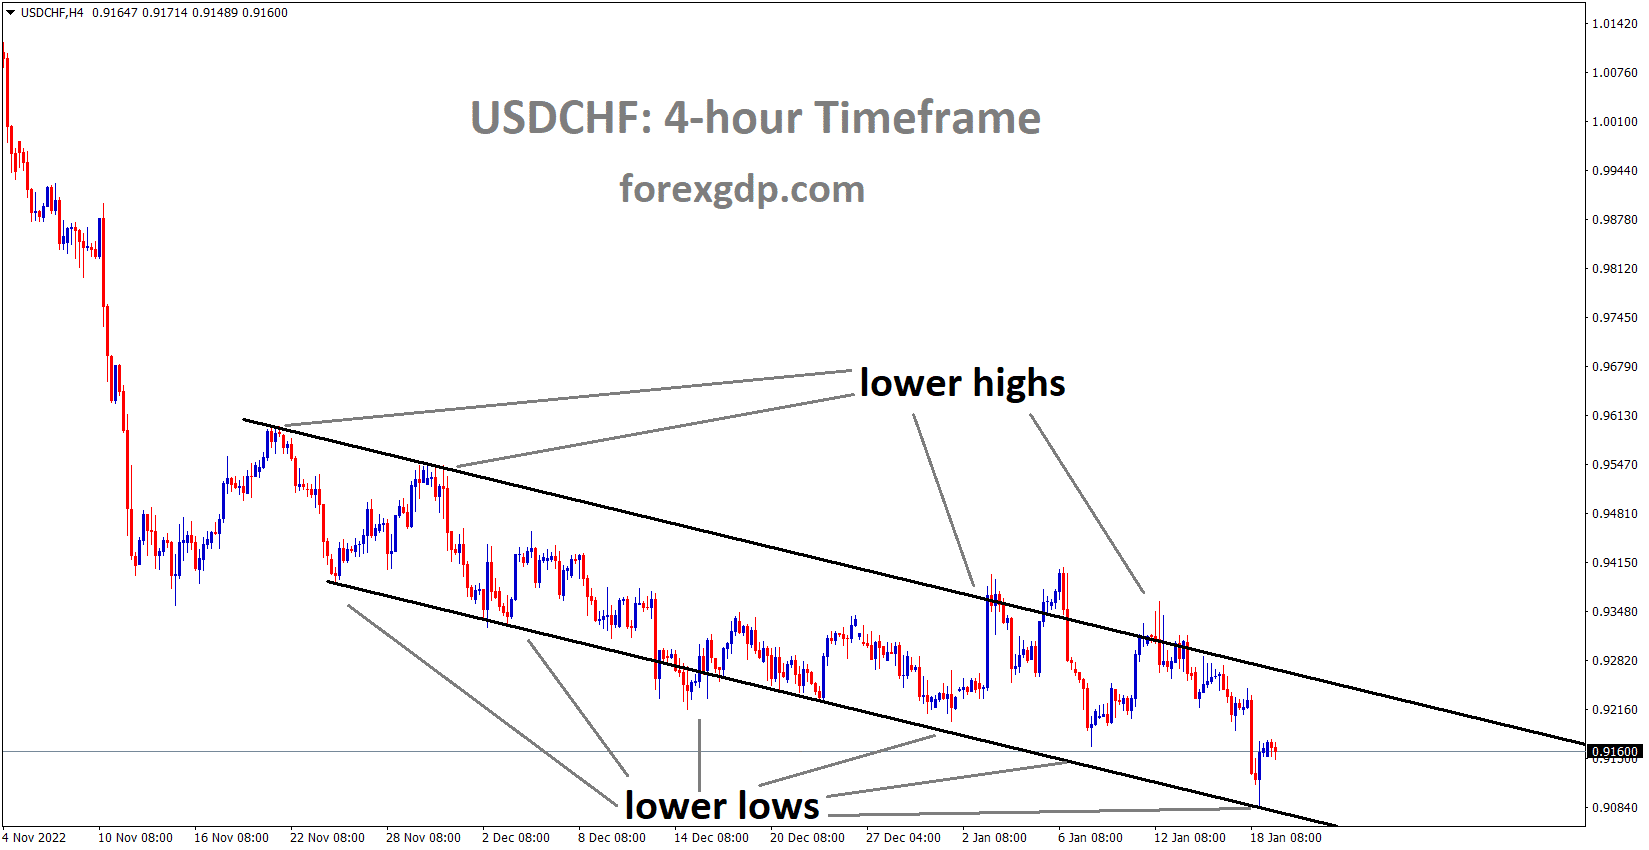 USDCHF is moving in the Descending channel and the market has rebounded from the lower low area of the channel 1